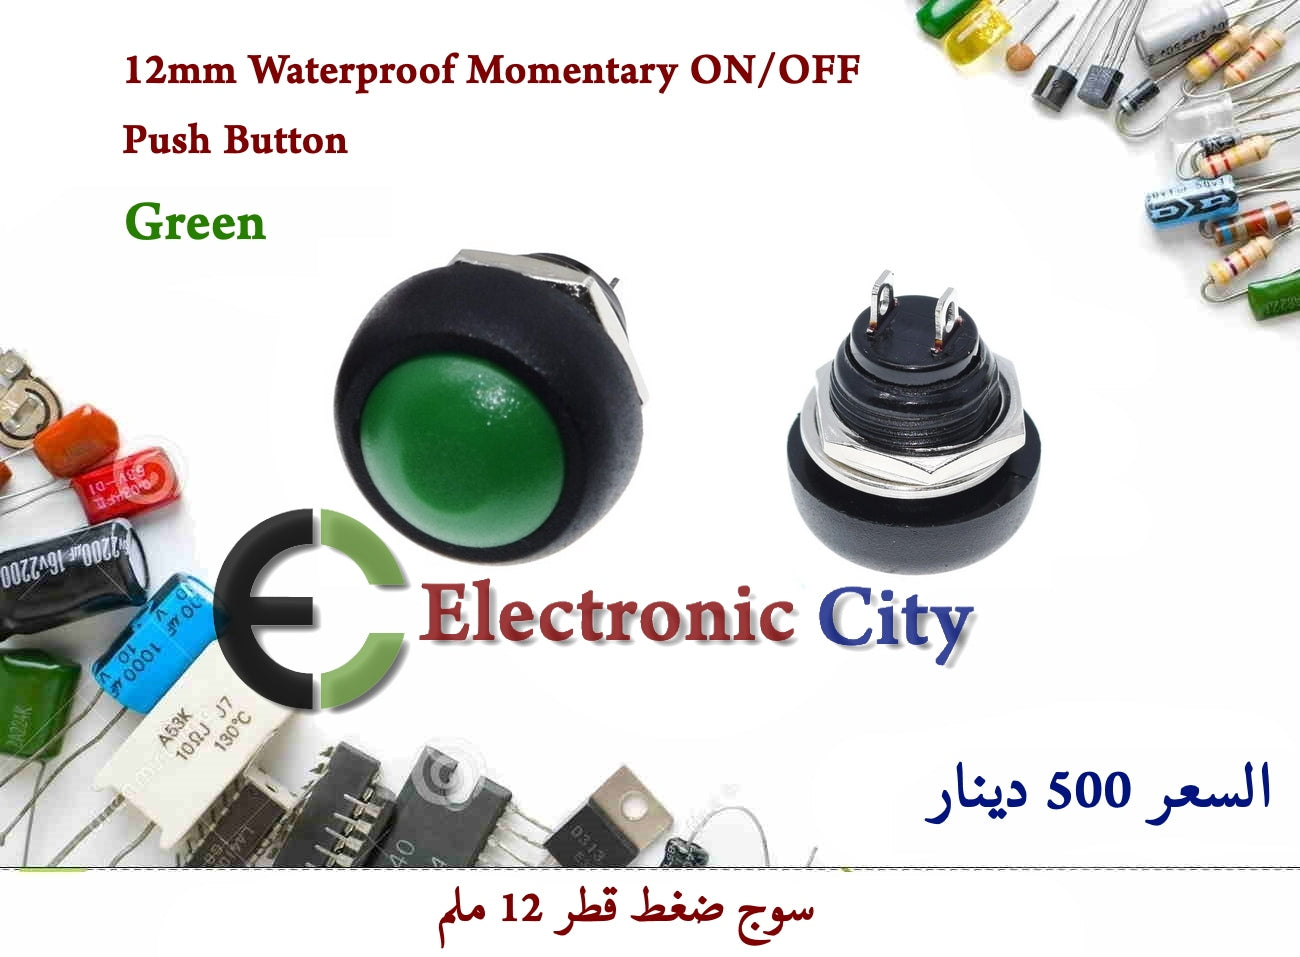 12mm Waterproof Momentary ON-OFF Push Button   Green